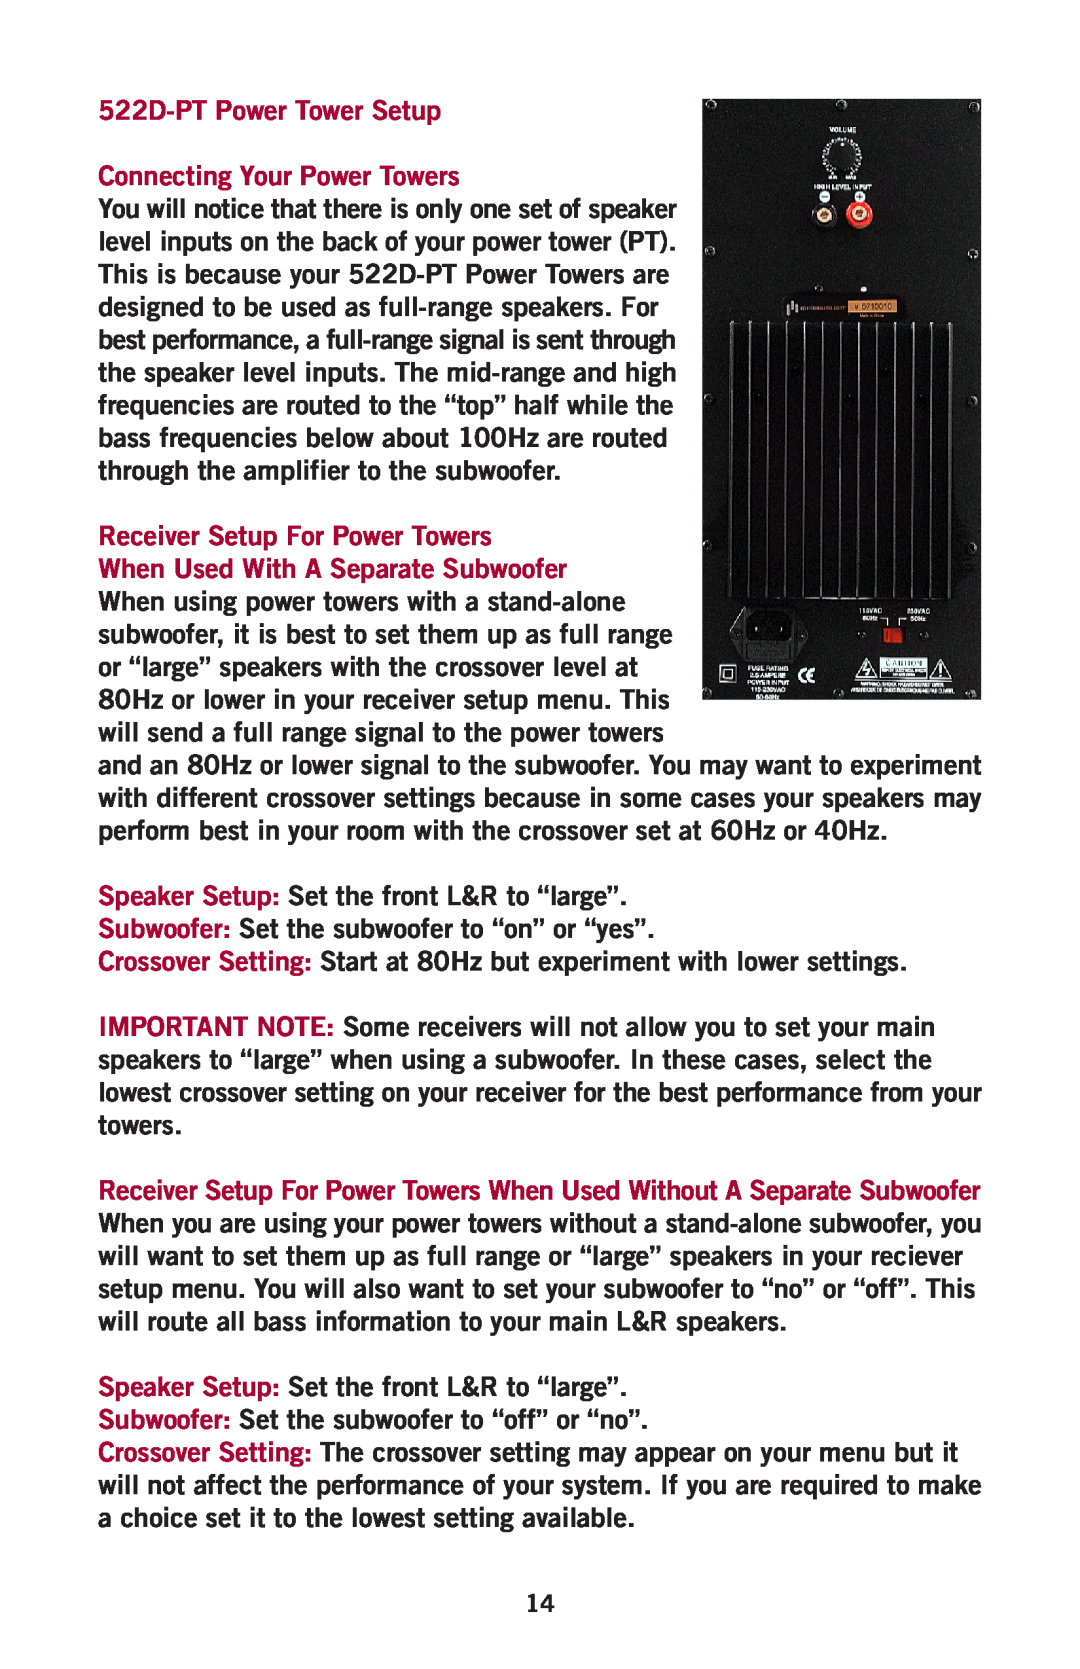 Aperion Audio Intimus Series owner manual 522D-PTPower Tower Setup, Connecting Your Power Towers 